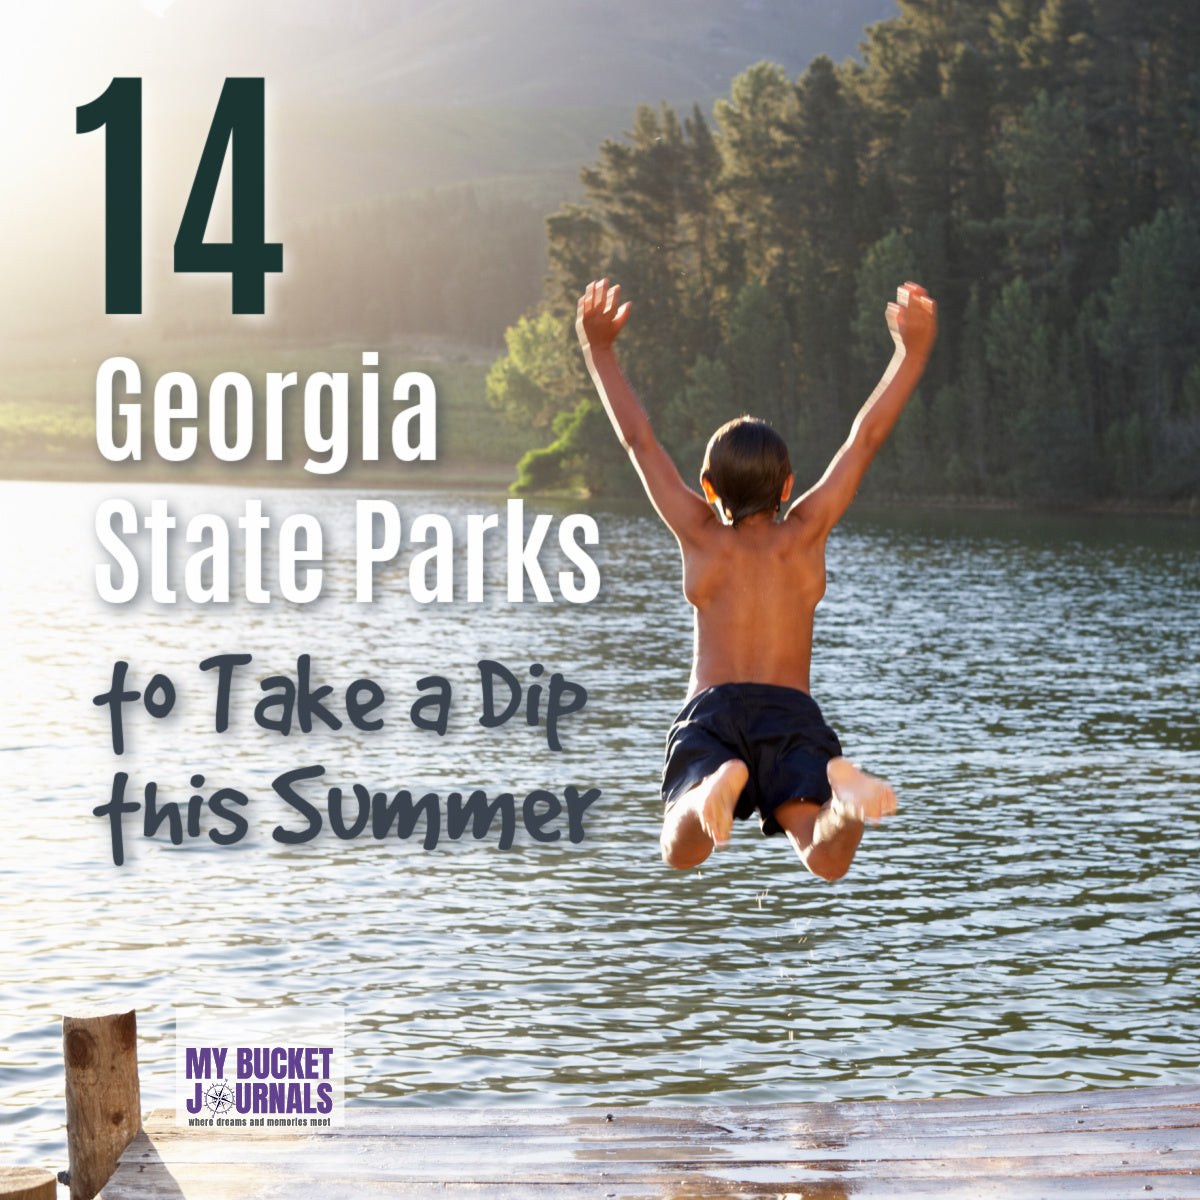 A boy taking a leap from a dock into a lake with text overlay that says 14 Georgia State Parks to Take a Dip this Summer